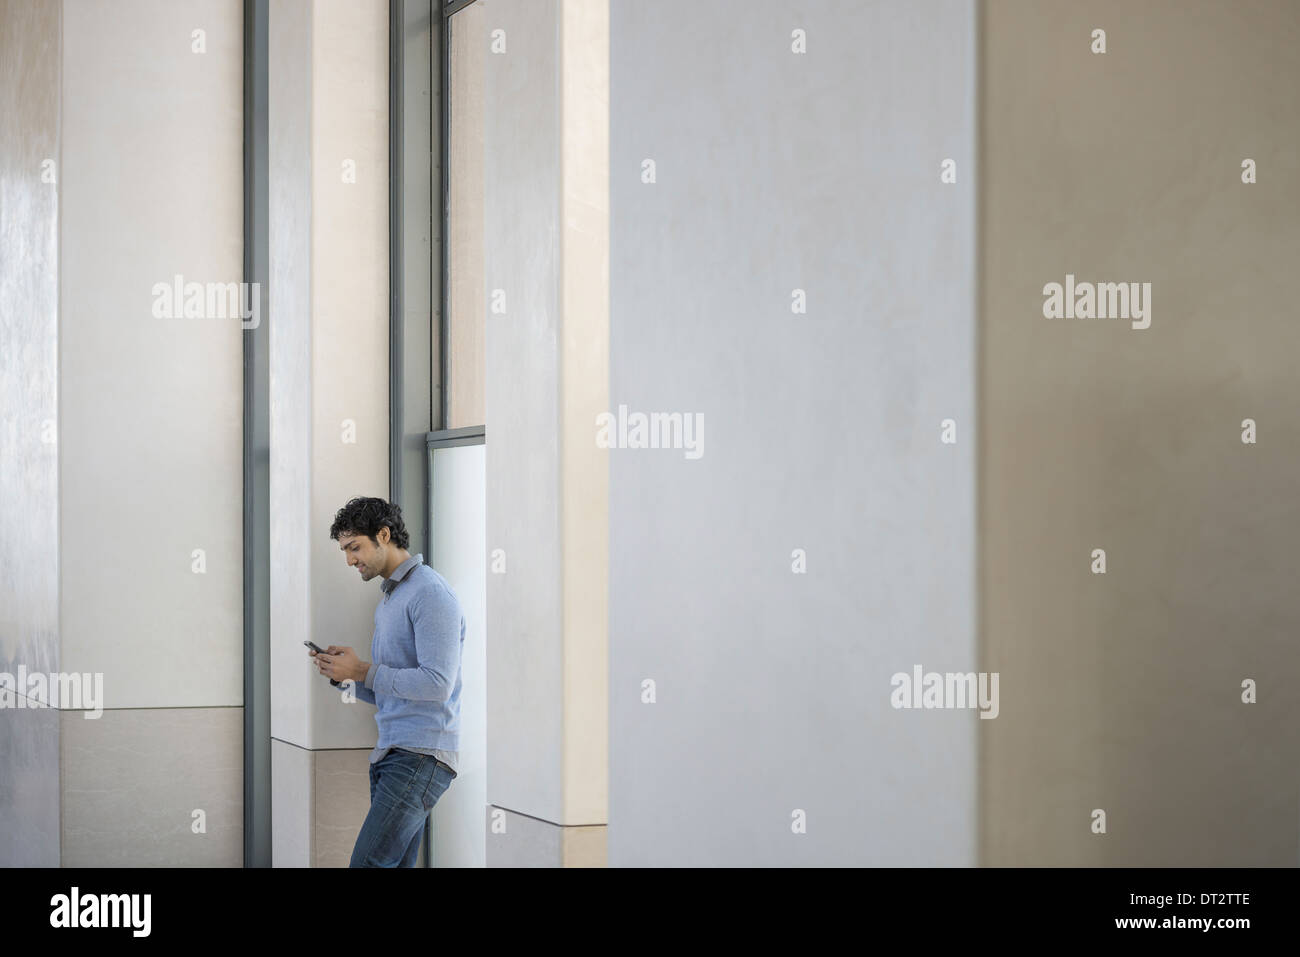 Urban Lifestyle A man in a blue sweater using his mobile phone An empty building Stock Photo